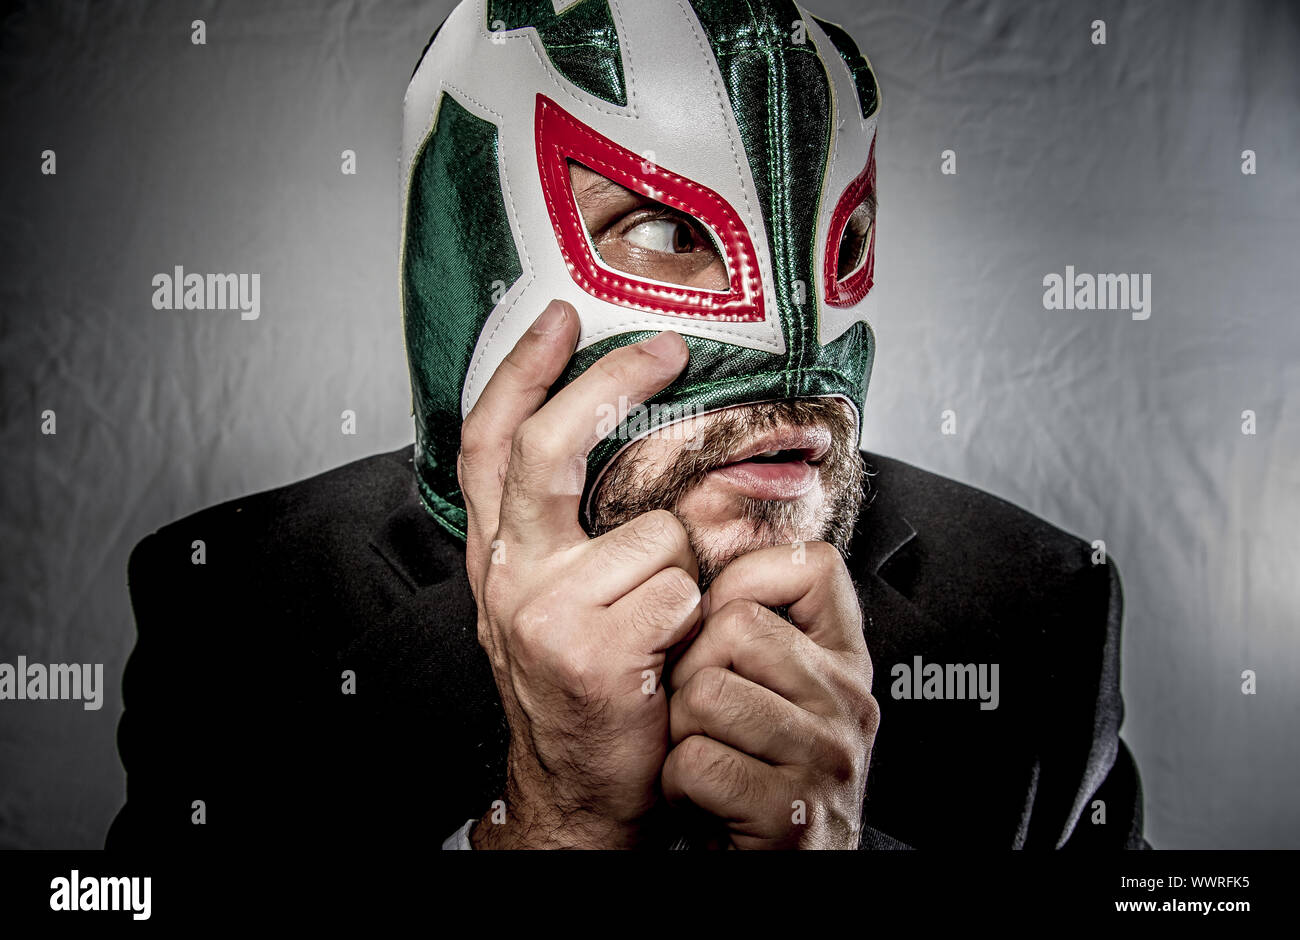 Angry businessman with mask of Mexican fighter, dressed in suit and tie Stock Photo